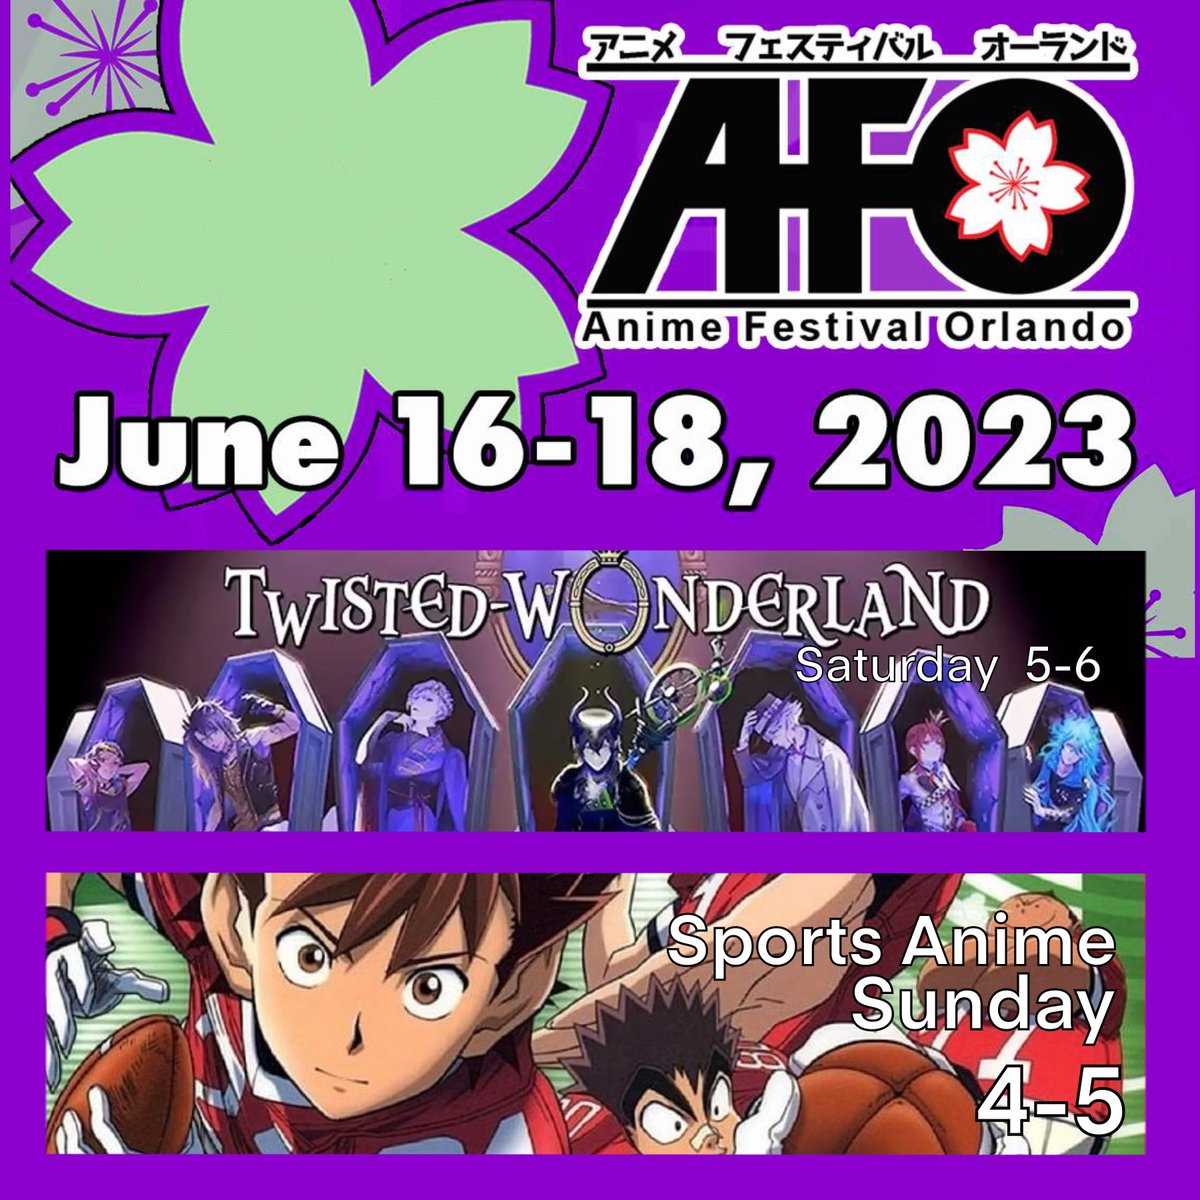 If you’re coming to #AFO2023 here are my panels this year! Both panels are later in the day. Twisted Wonderland is Saturday 5-6 in PR2 and Sports Anime is Sunday 4-5 in PR1 @AFOupdate #animefestivalorlando #twistedwonderland